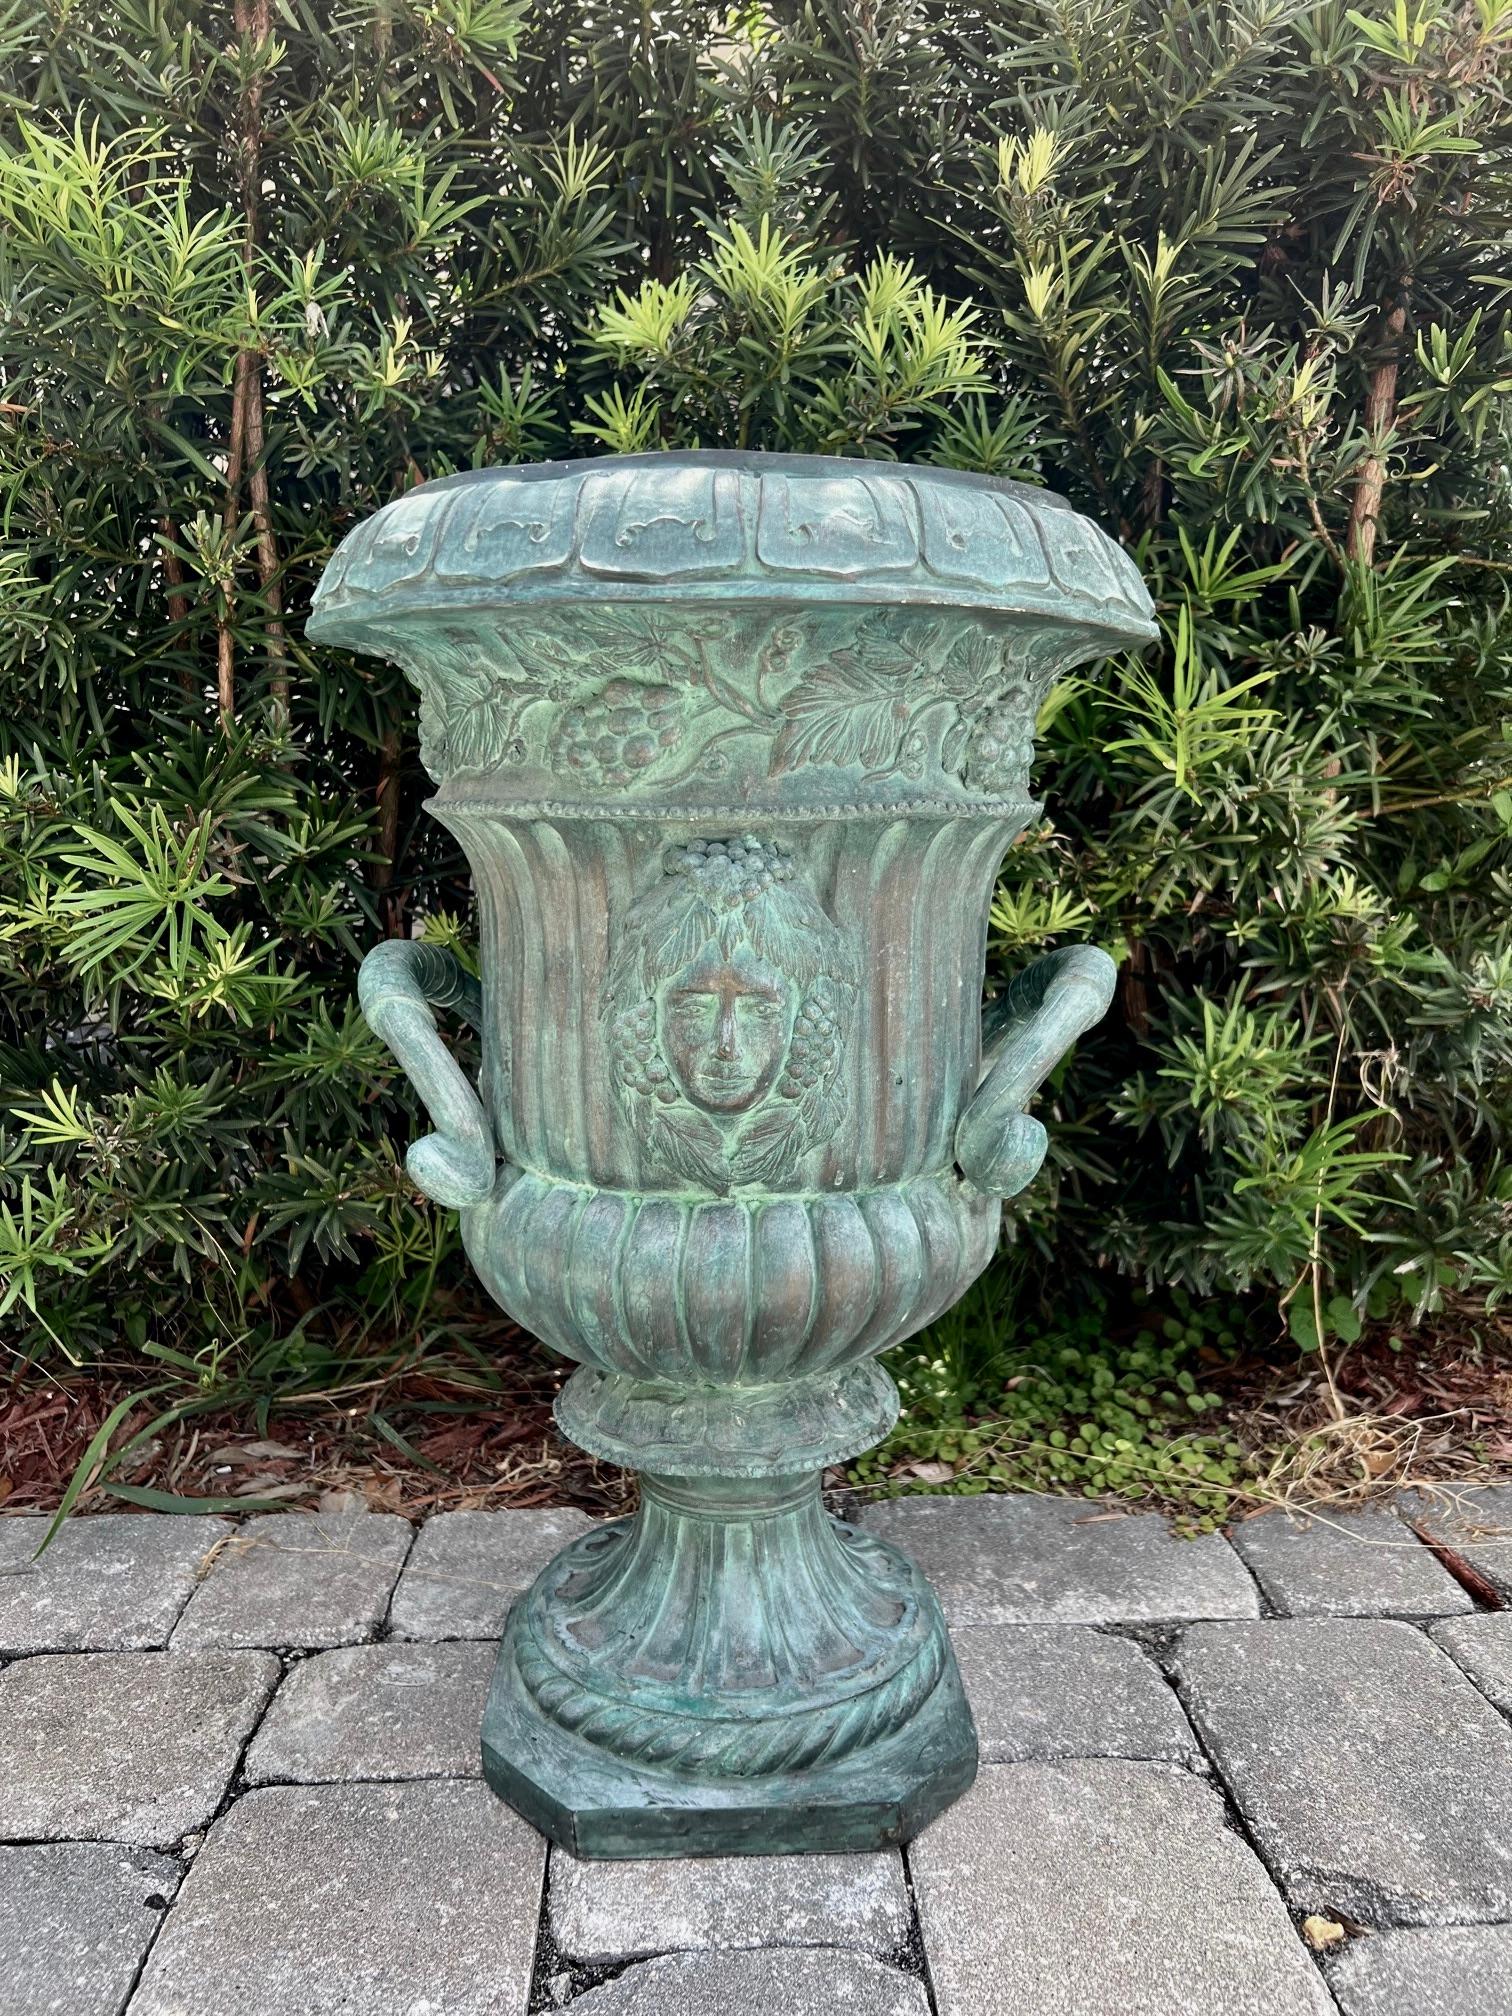 Antique Campana urn in cast bronze with verdigris finish. The garden urn has a series of elegant hand-forged neoclassical motifs throughout. The crown features a geometric pattern reminiscent of Art Nouveau designs. The urn has a tapered form with